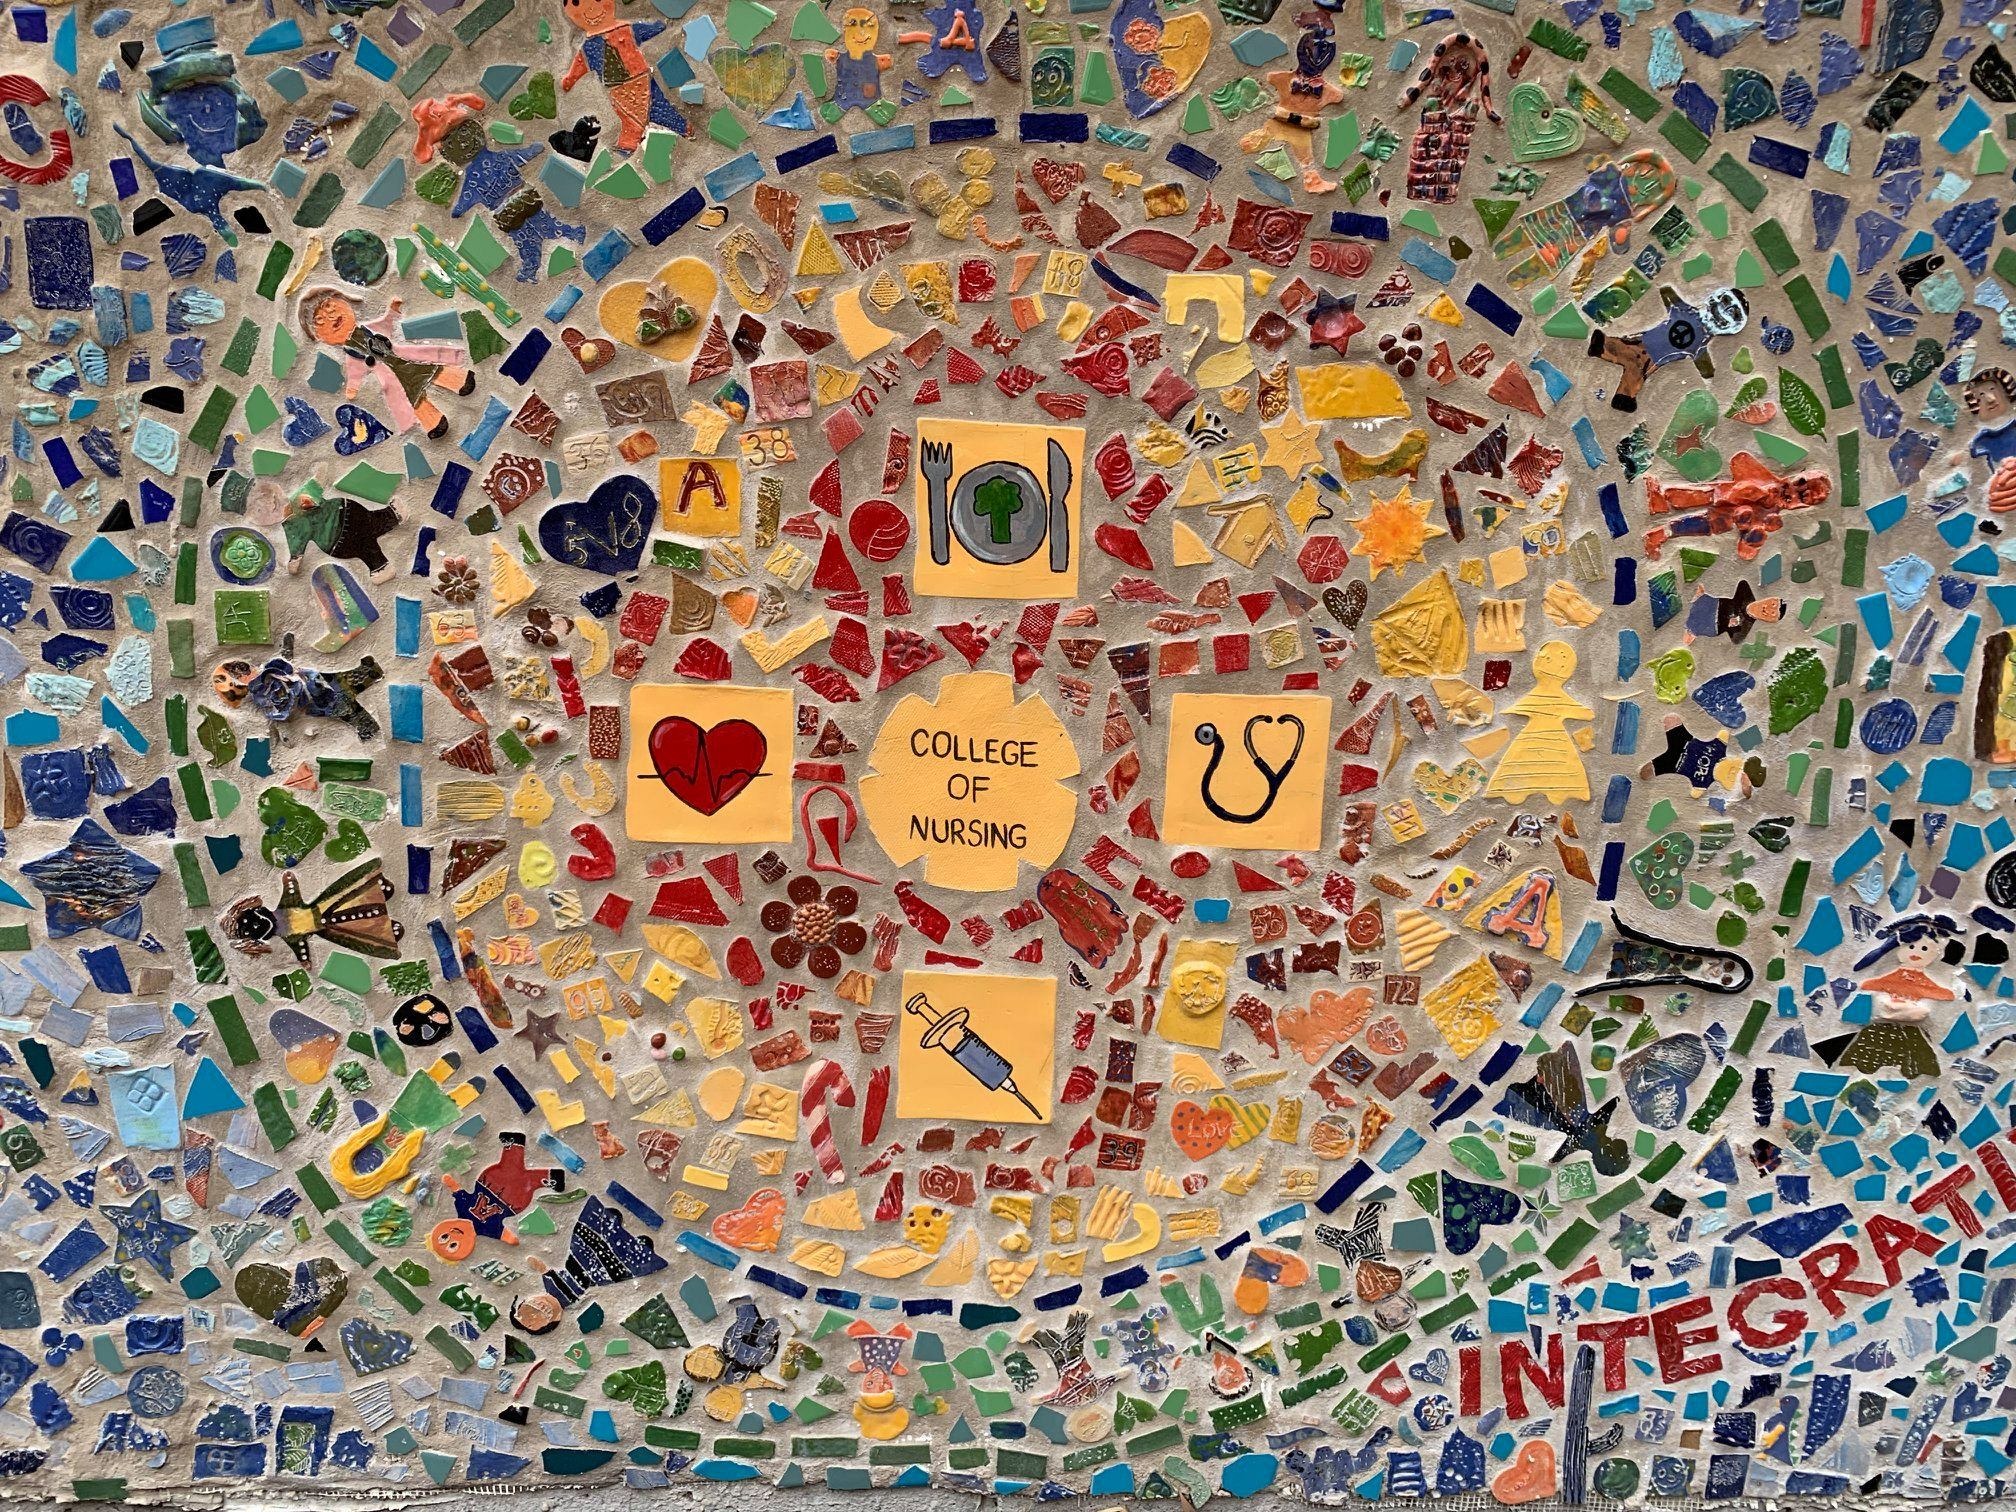 A mural created by the artists of Artworks that represents the UArizona College of Nursing.